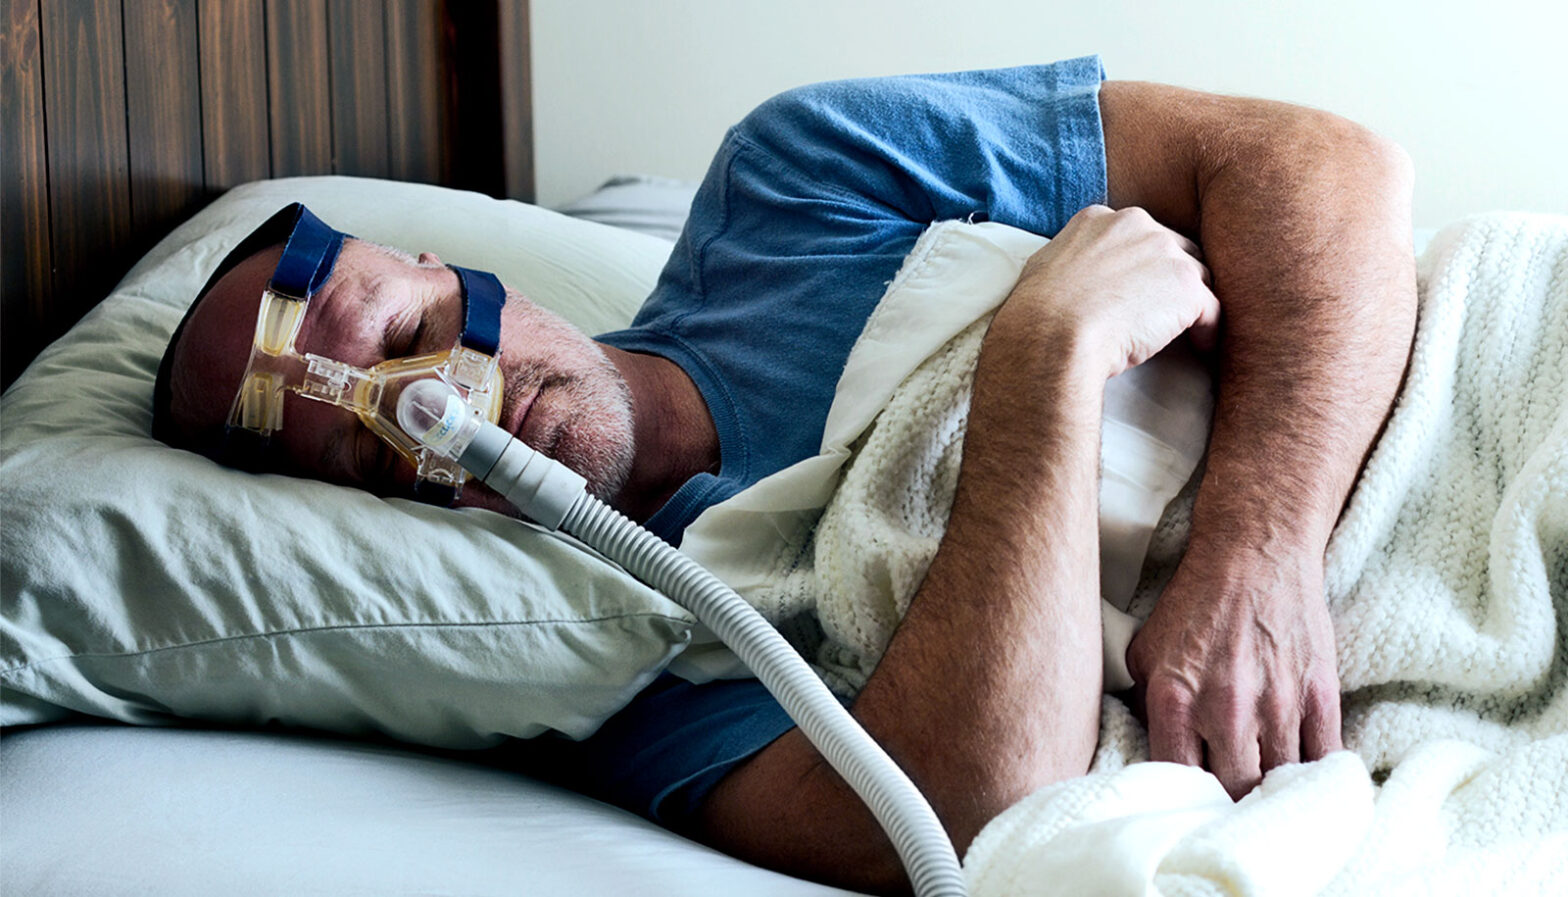 Is Your CPAP Machine Pressure Too High? Learn What to Do